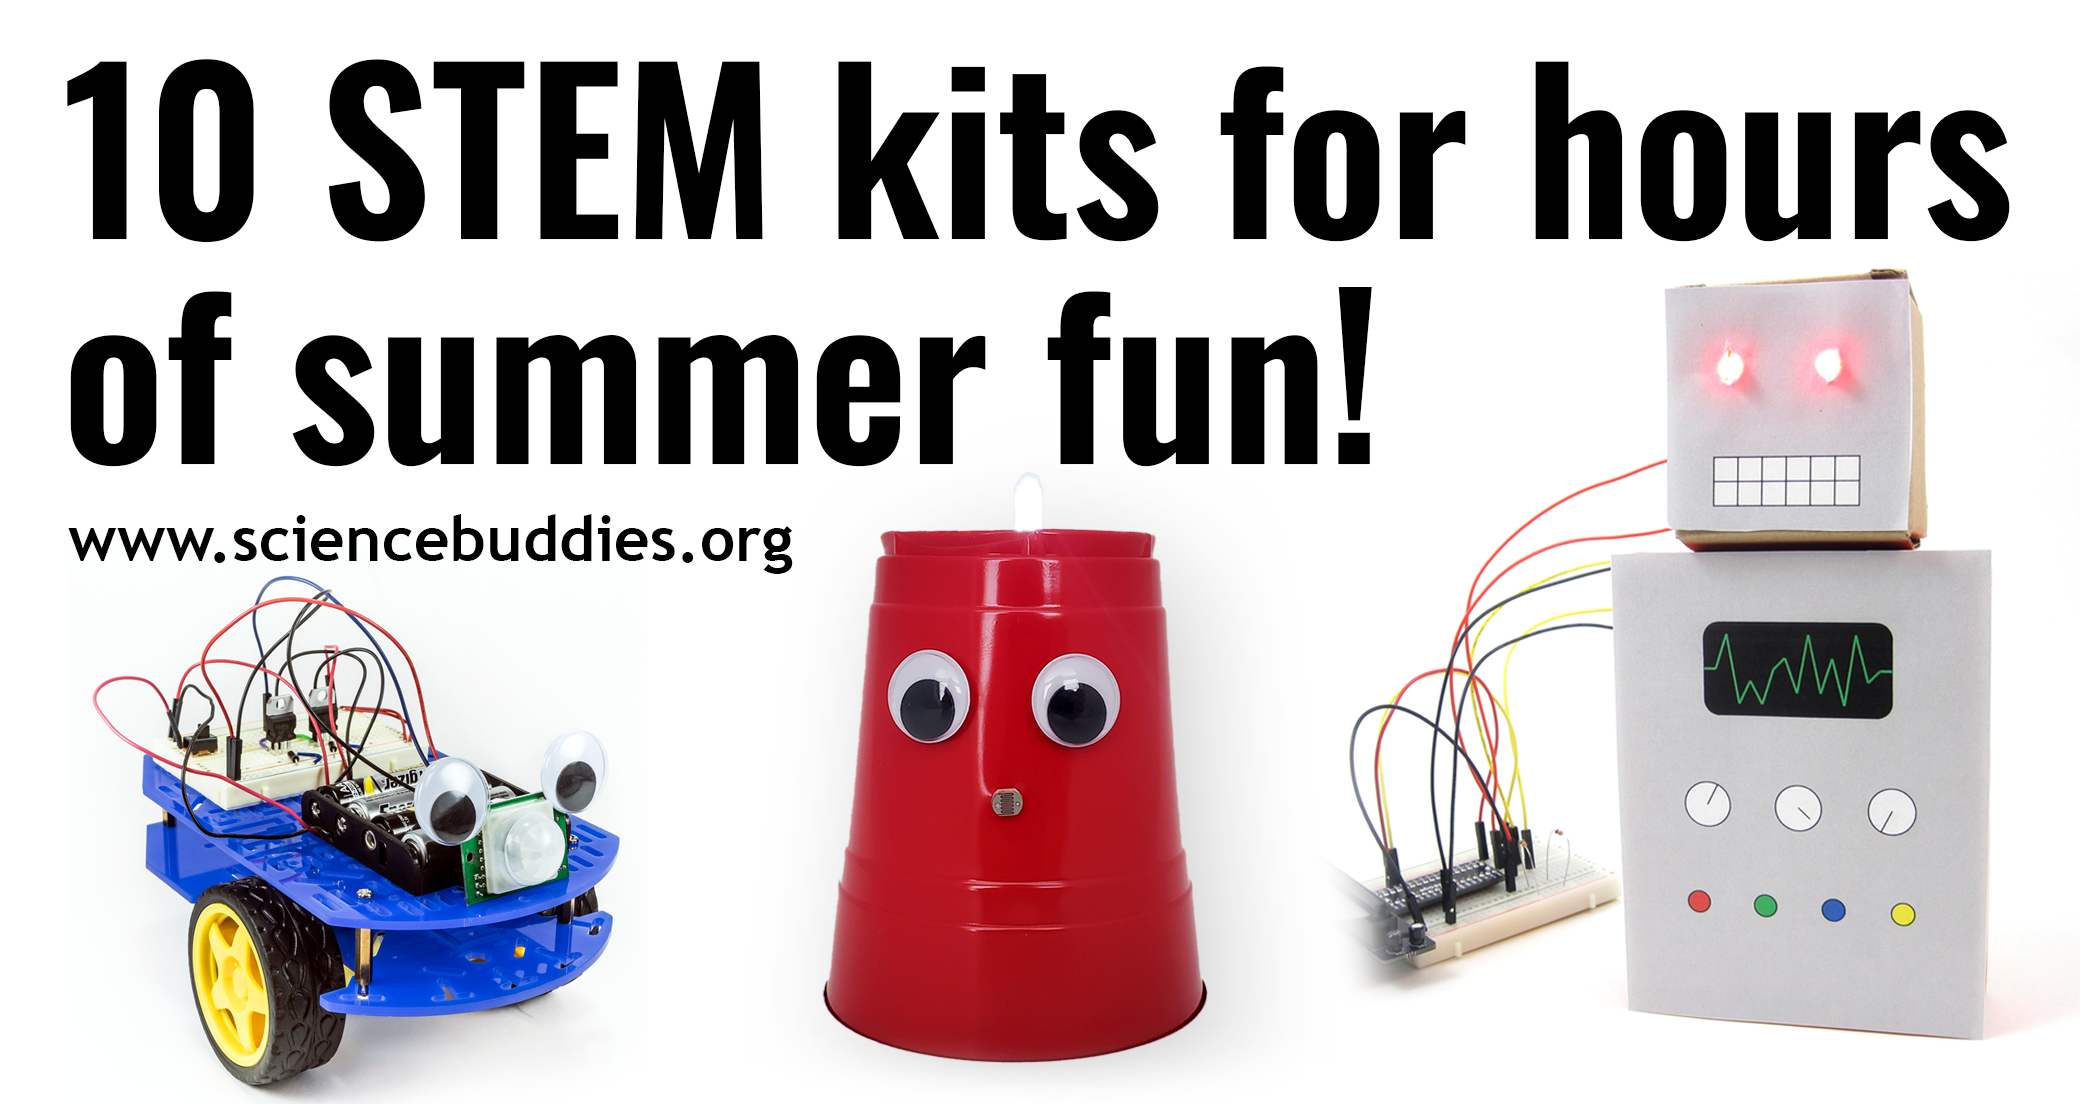 Images of bluebot robot, plastic cup night-light, and digital toy made with Raspberry Pi and Scratch, 3 of 10 kits highlighted for summer science experiments